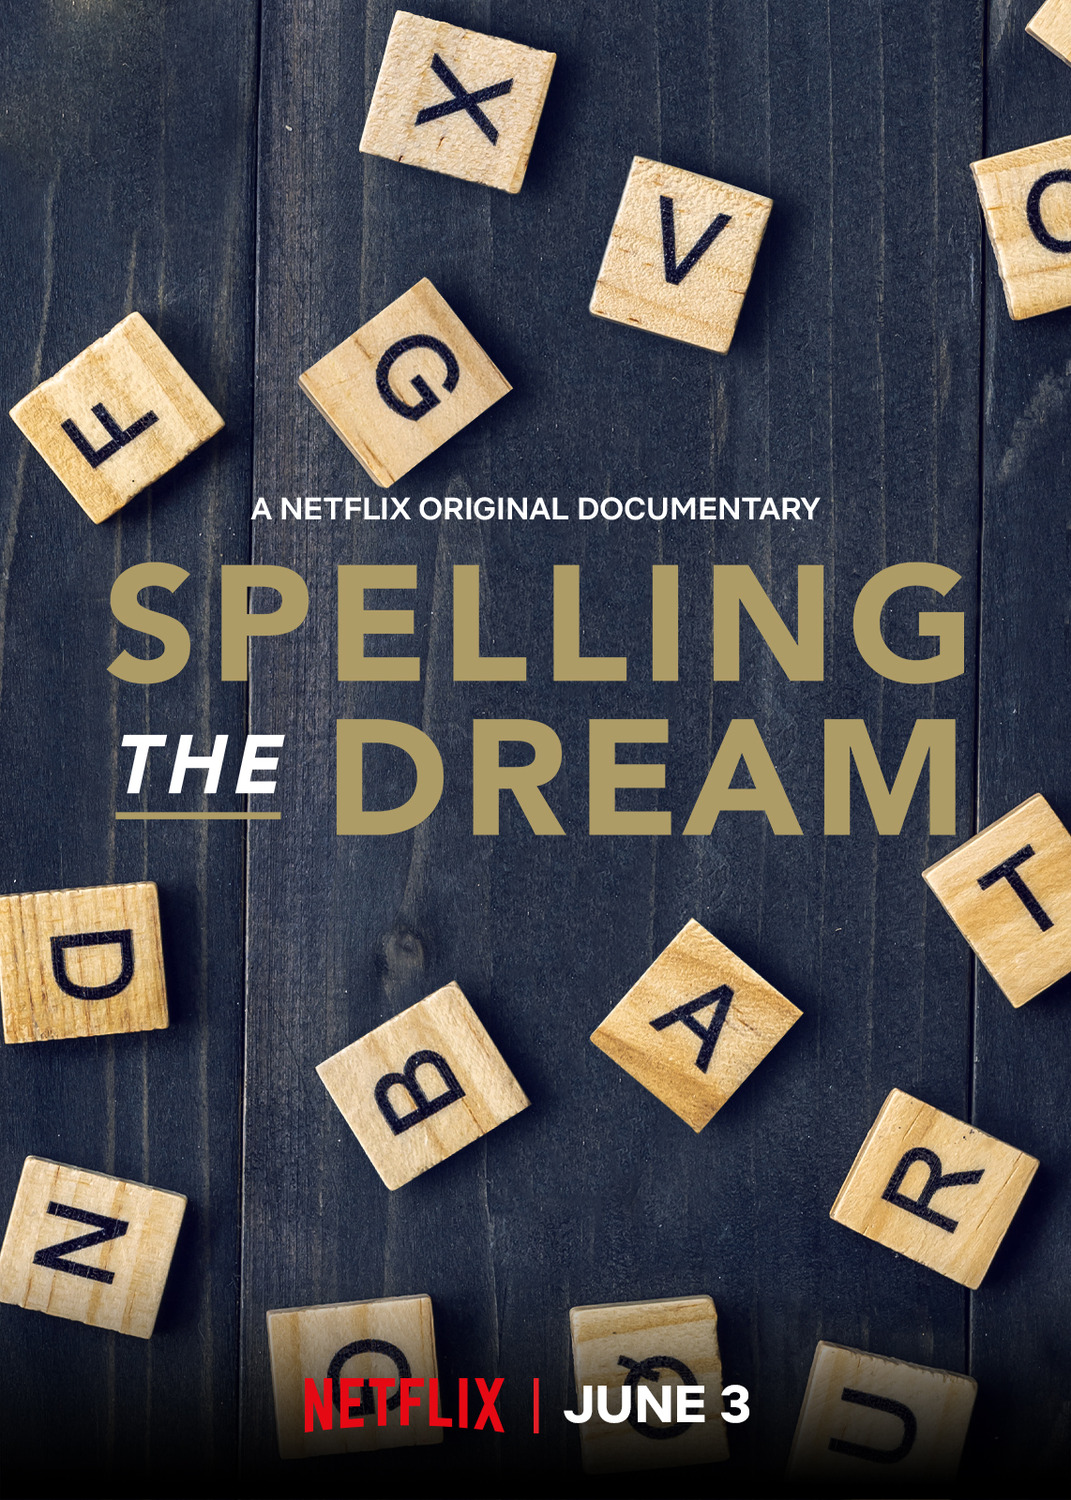 Extra Large TV Poster Image for Spelling the Dream 